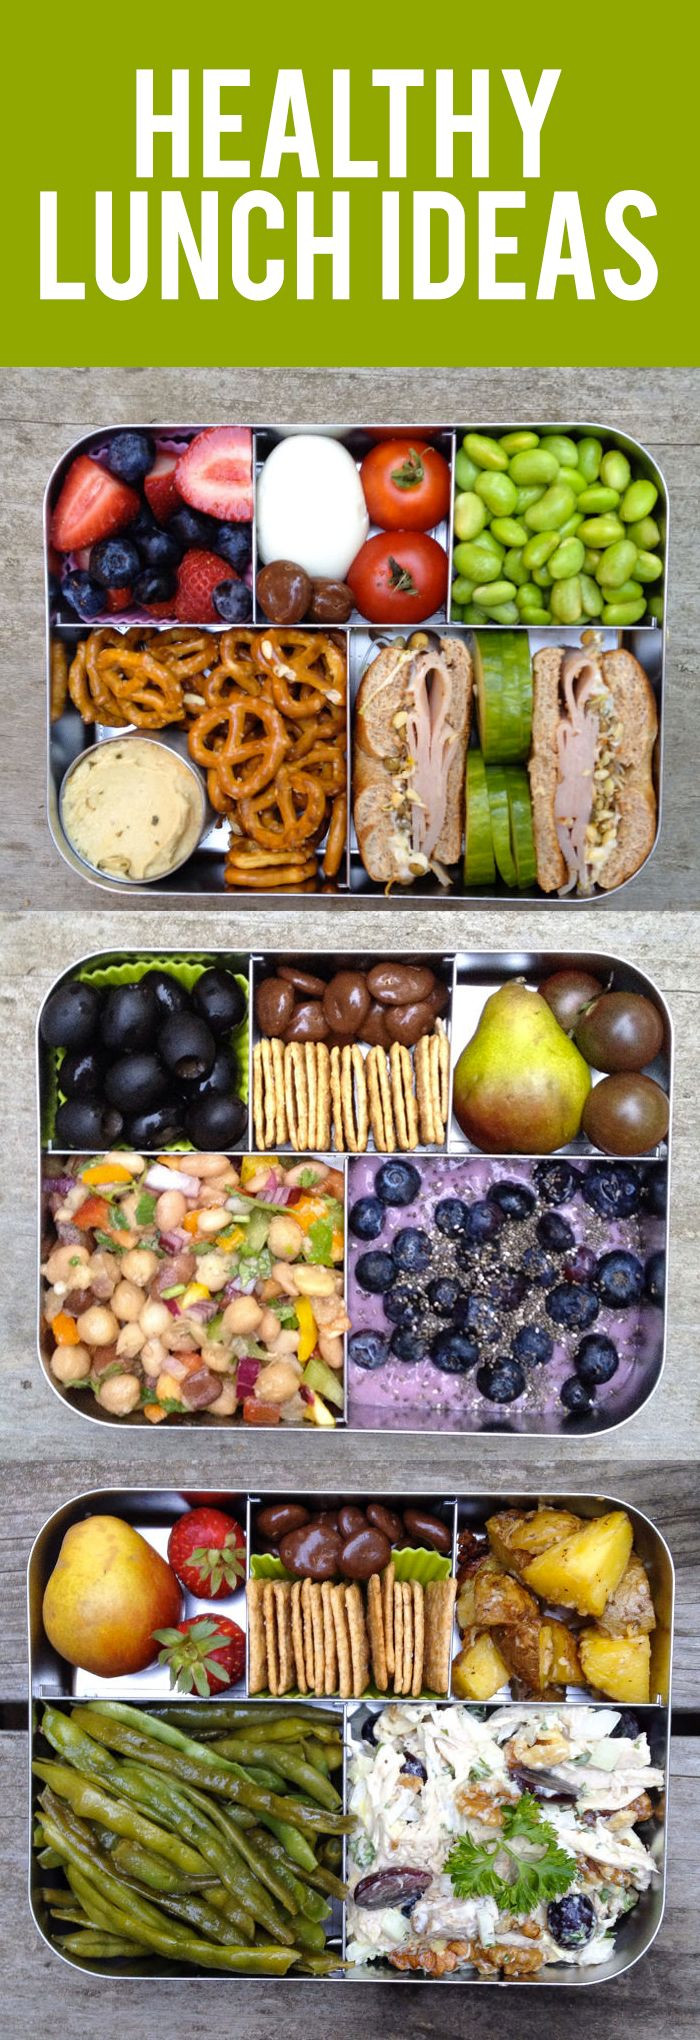 Healthy Snacks For Work Lunch
 25 best ideas about Healthy Lunches on Pinterest